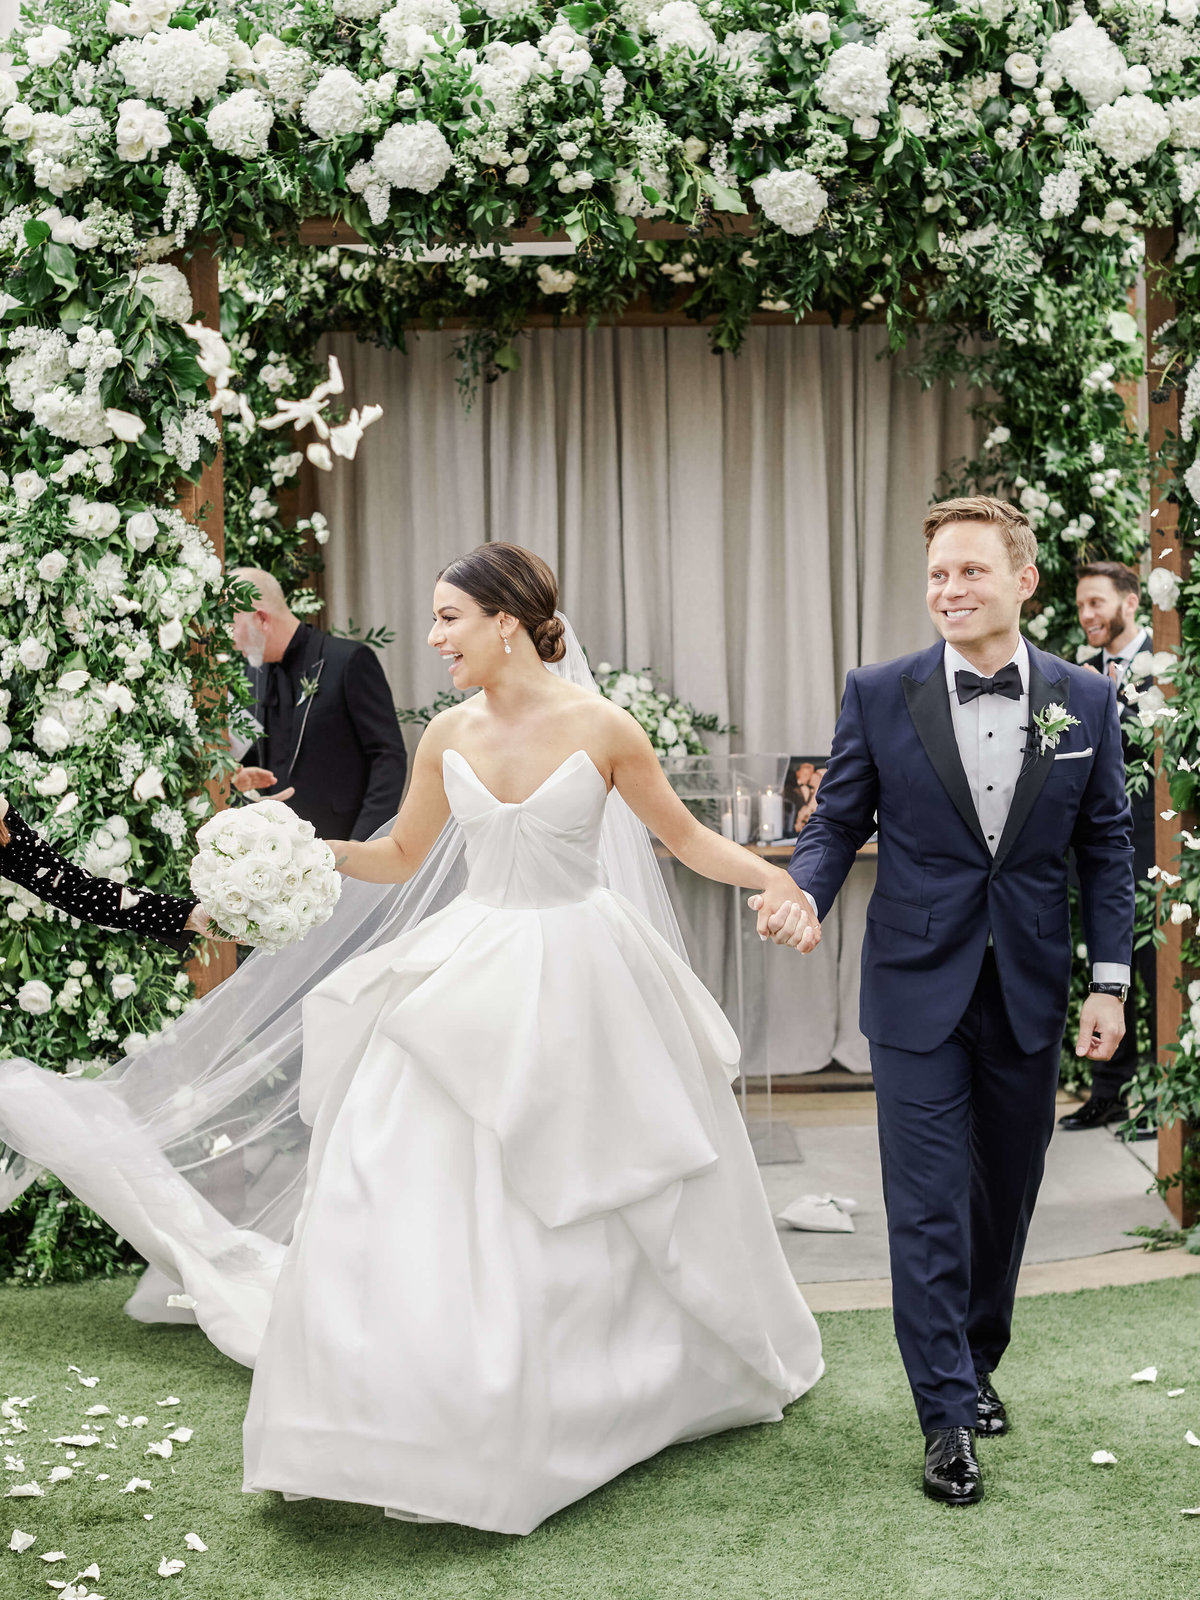 26-KTMerry-photography-Lea-Michele-celebrity-wedding-recessional